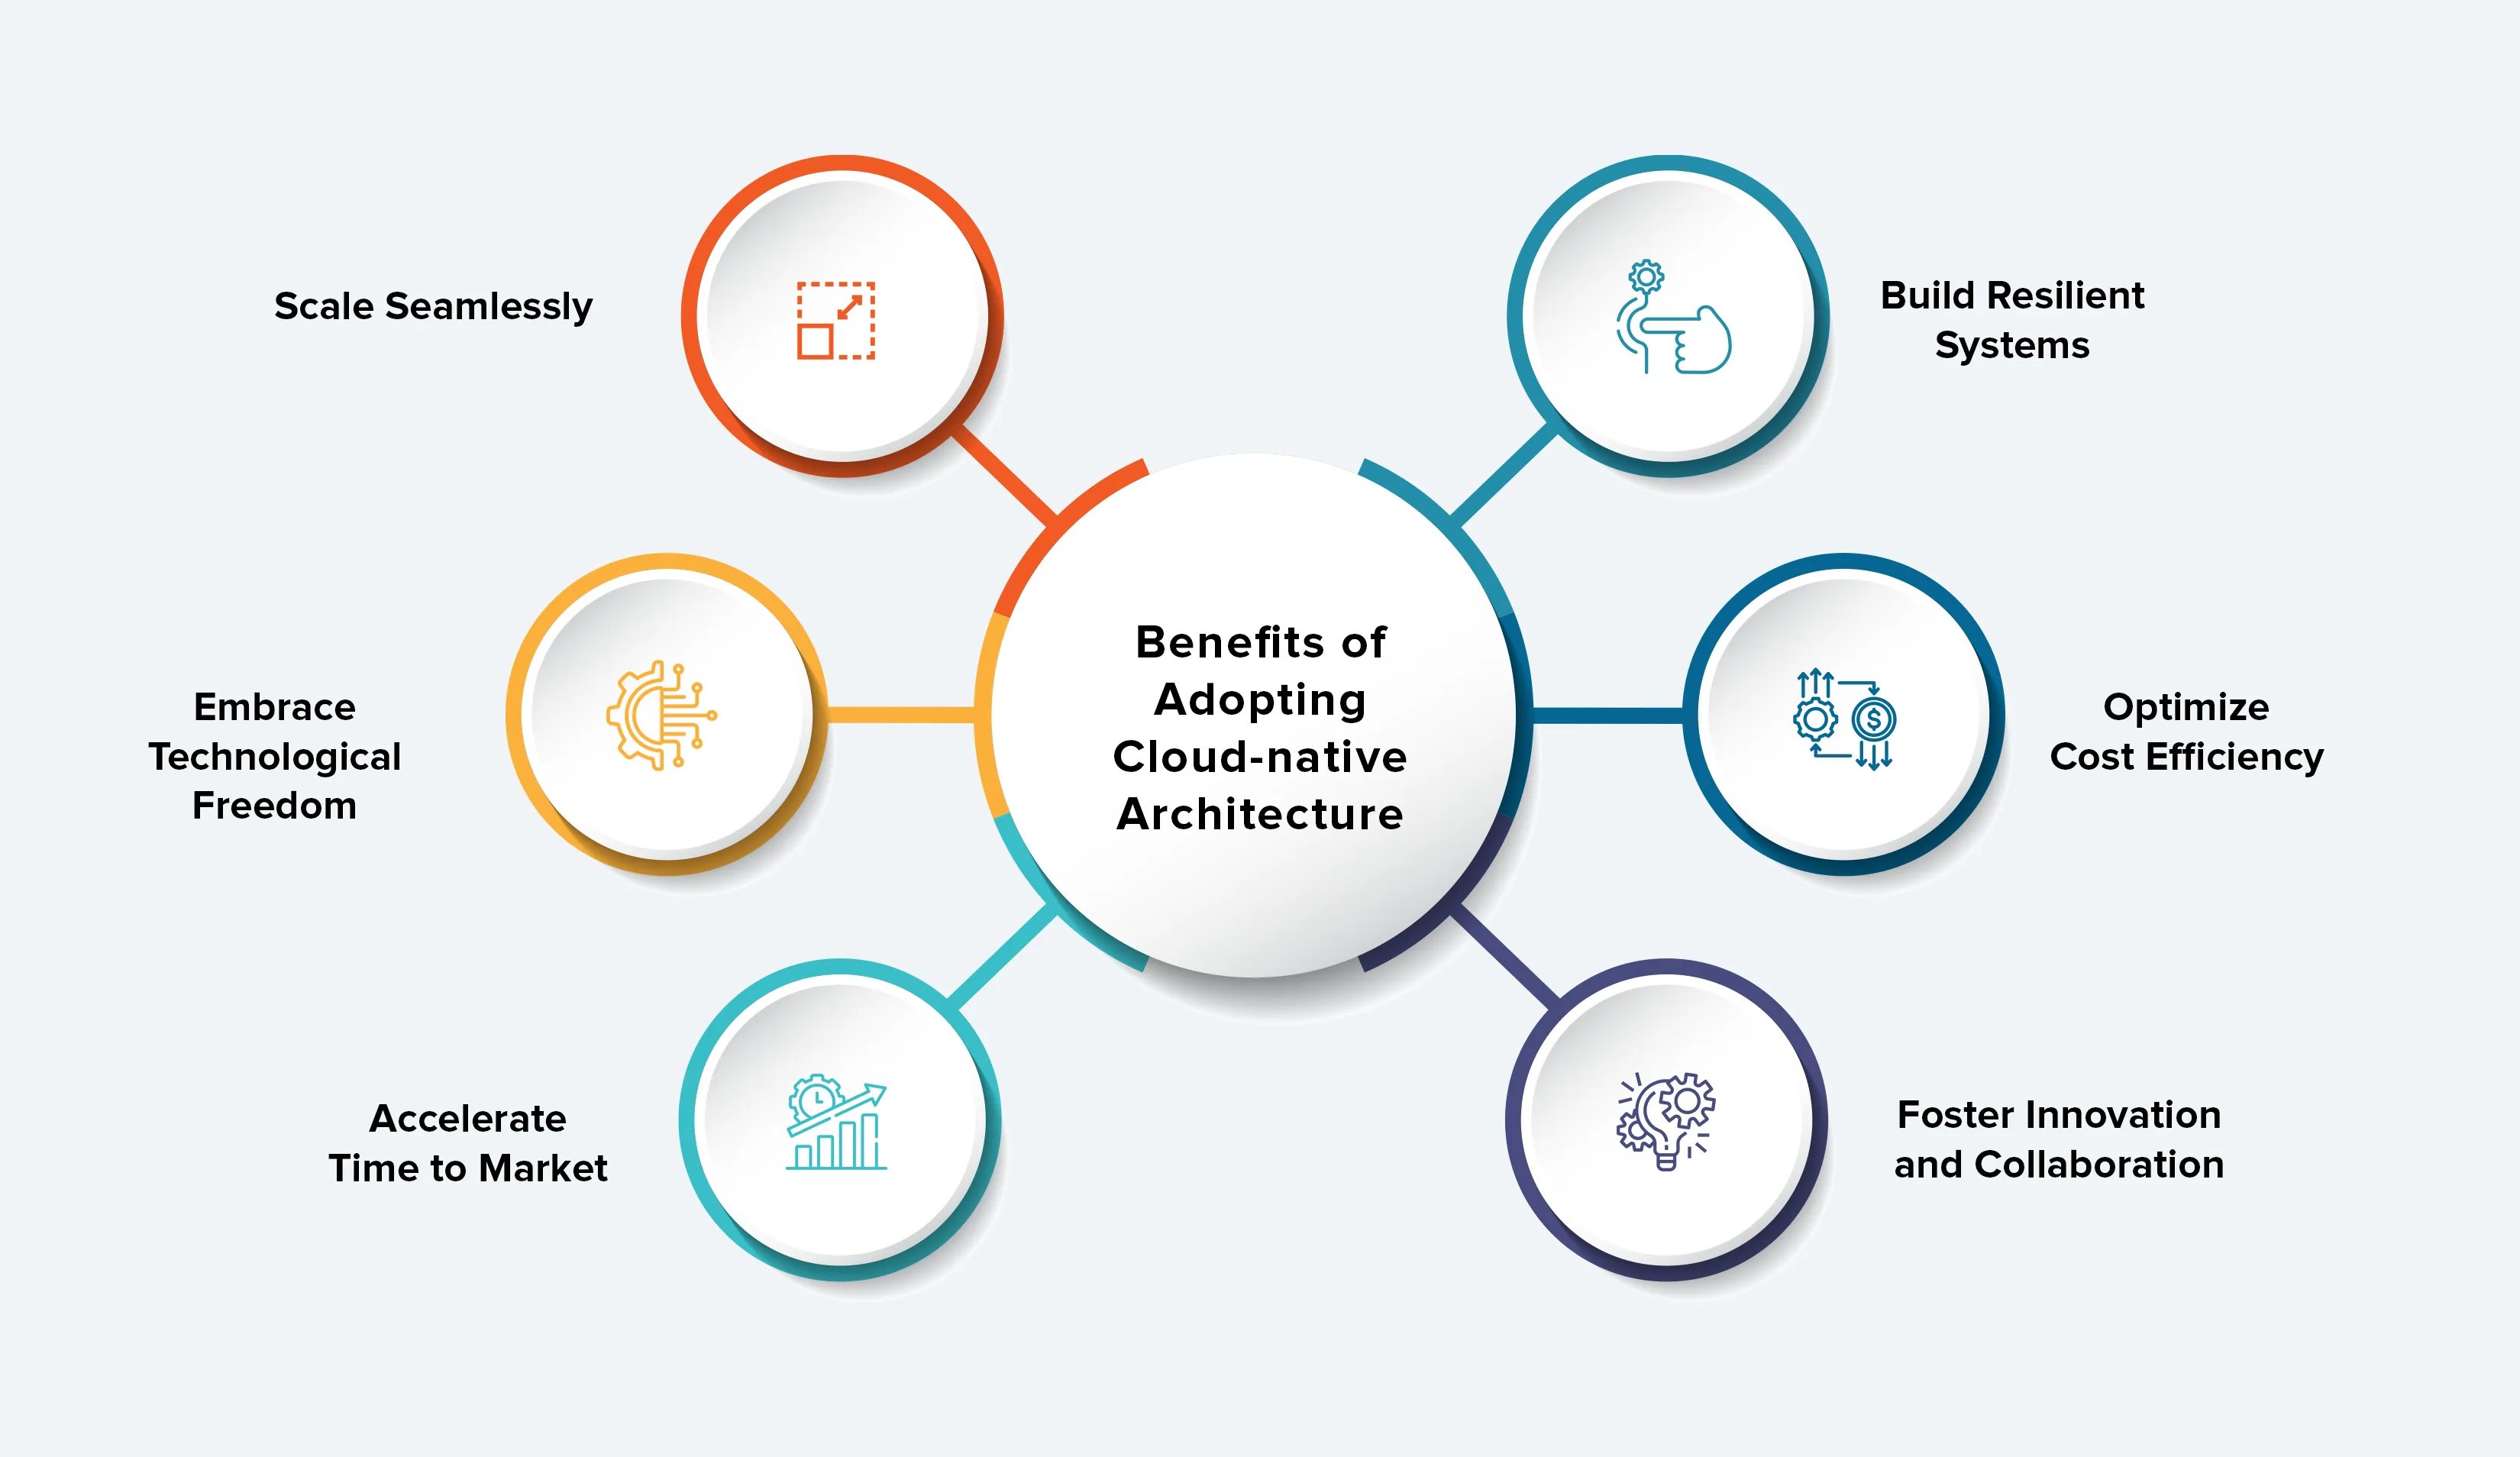 Benefits of Adopting Cloud-native Architecture